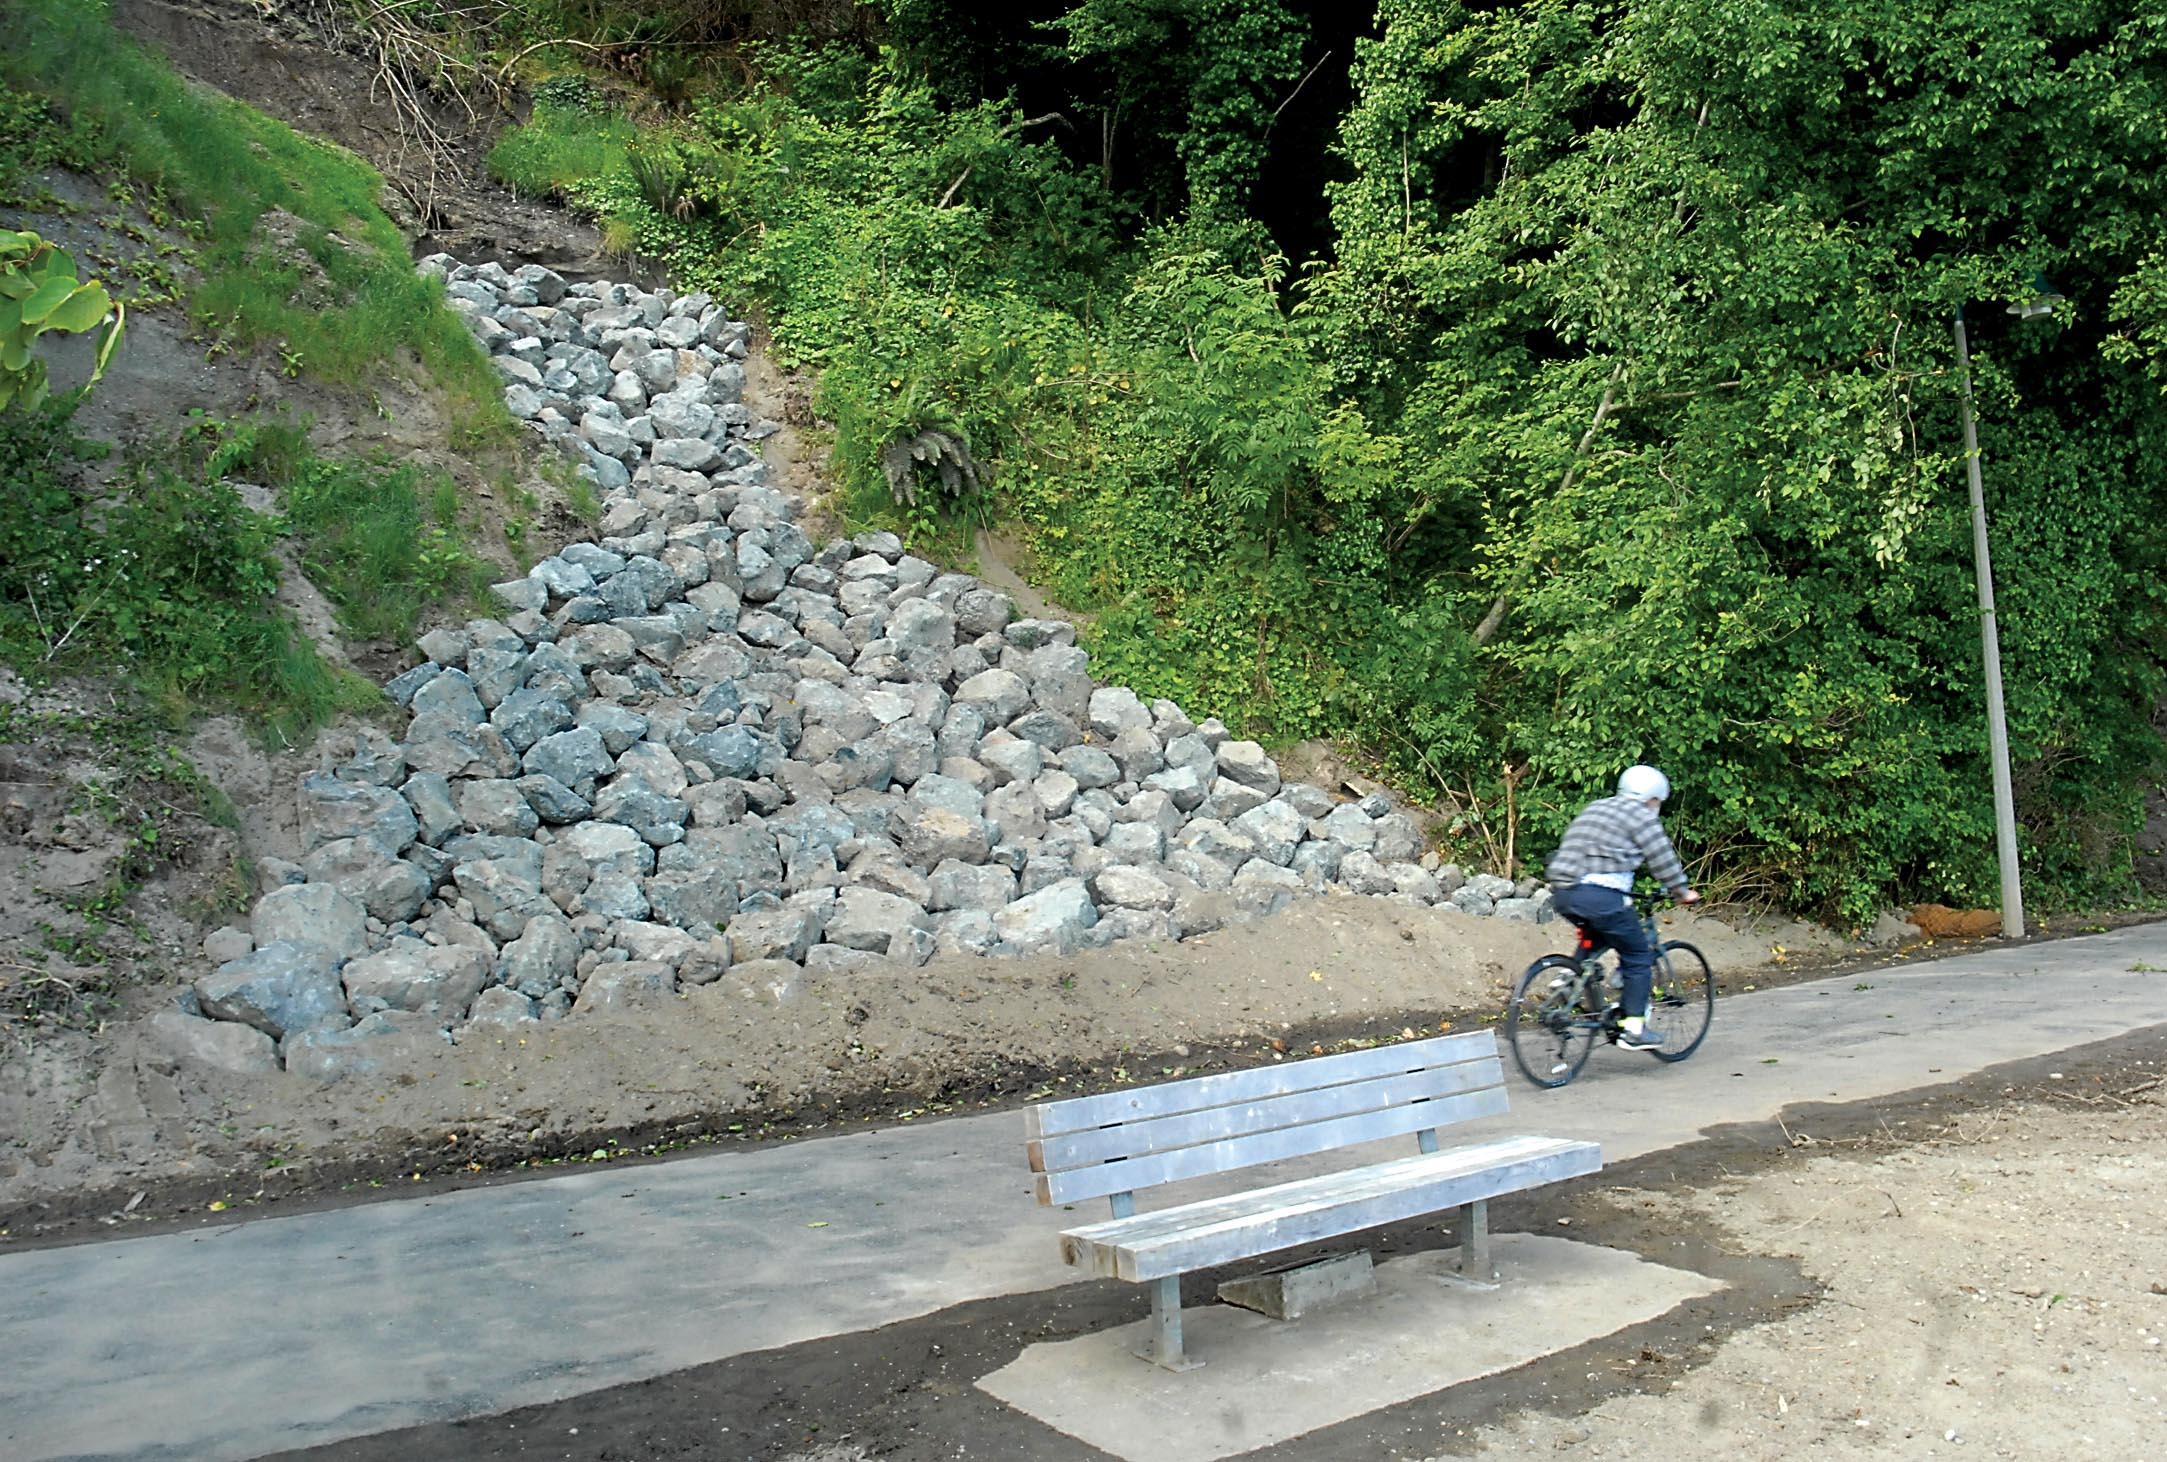 Clallam County crews reopened the Waterfront Trail